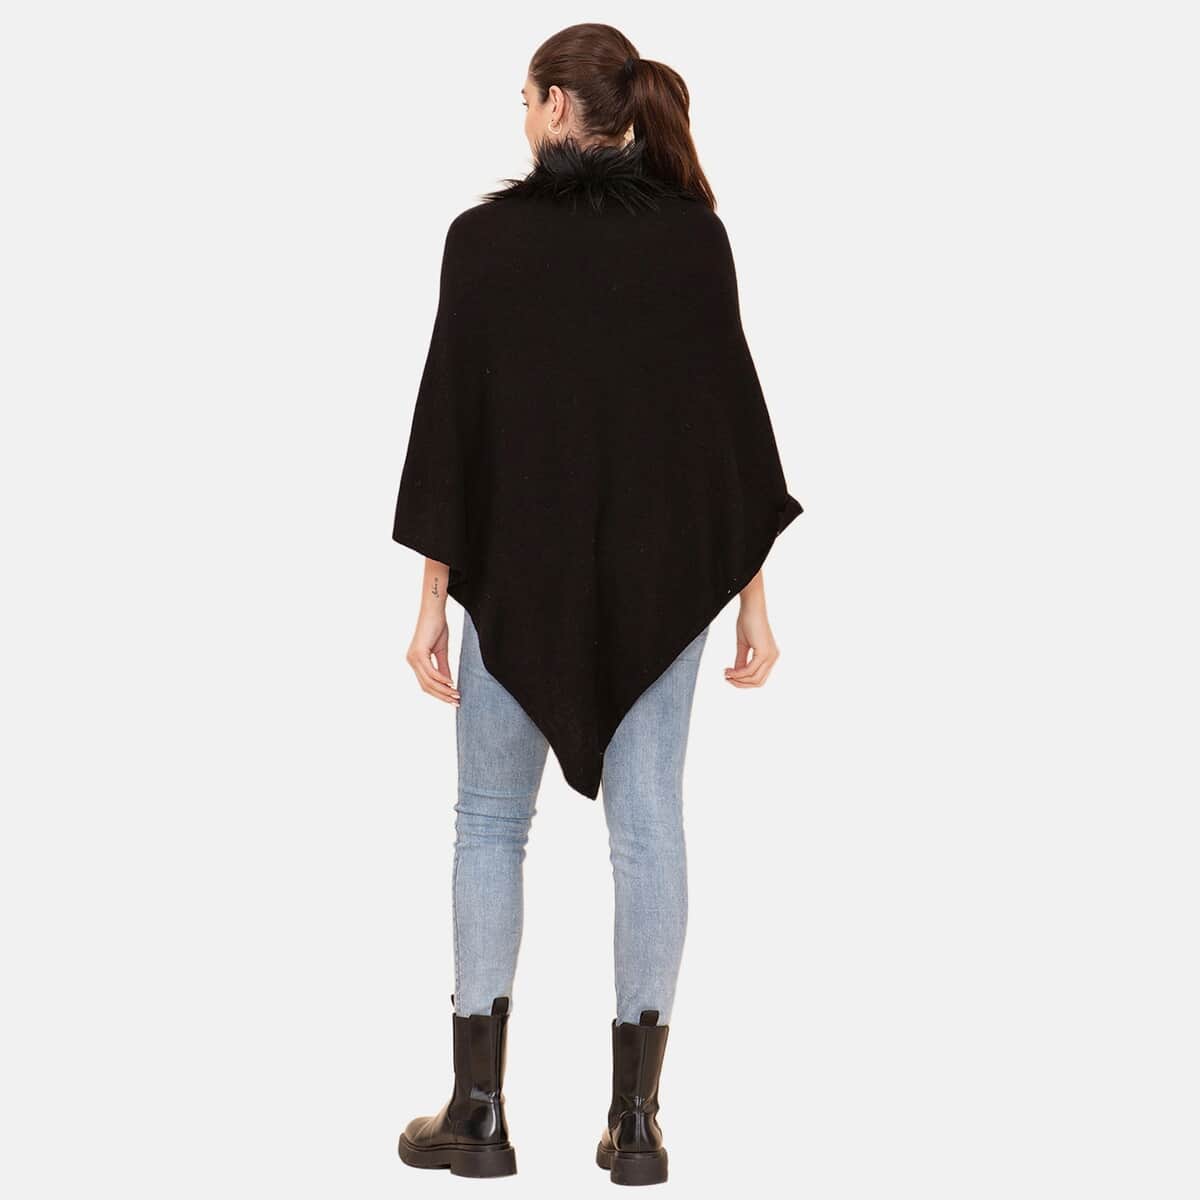 LA MAREY 100% Pashmina Cashmere Wool Black Designer Poncho for Women with Faux Fur Trim - One Size Fits Most , Cashmere Poncho , Women Capes , Poncho Scarf image number 1